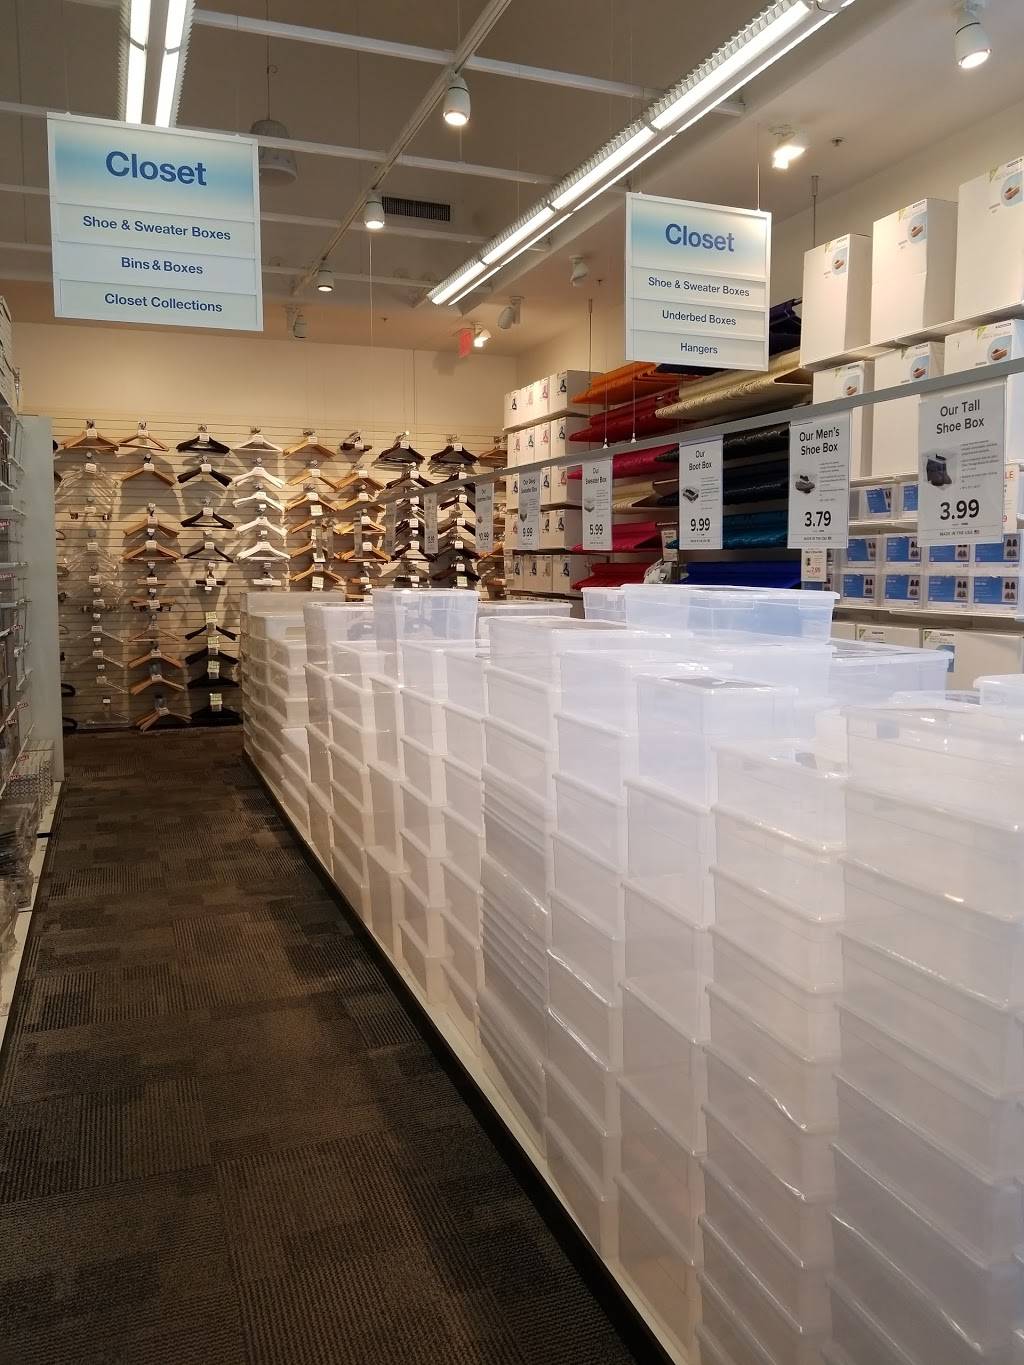 The Container Store | 18550 N Scottsdale Rd, Phoenix, AZ 85054 | Phone: (480) 563-7611